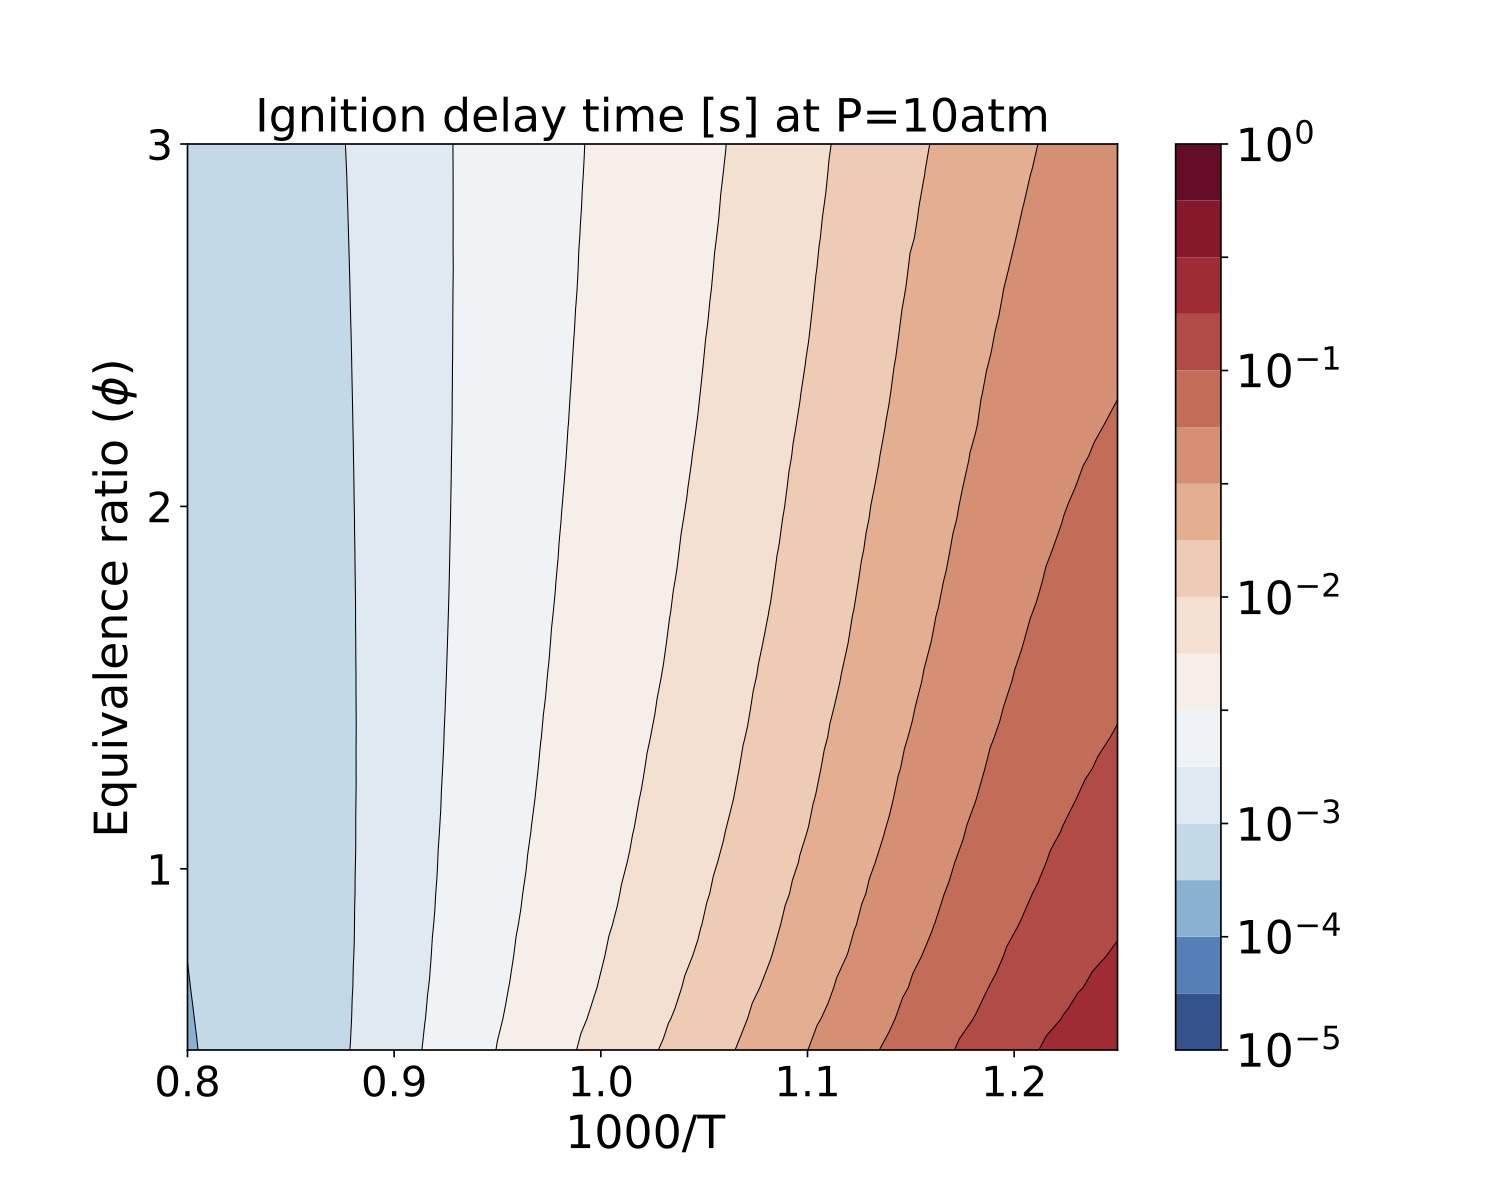 Ignition delay time (s) of isooctane at 10 atm